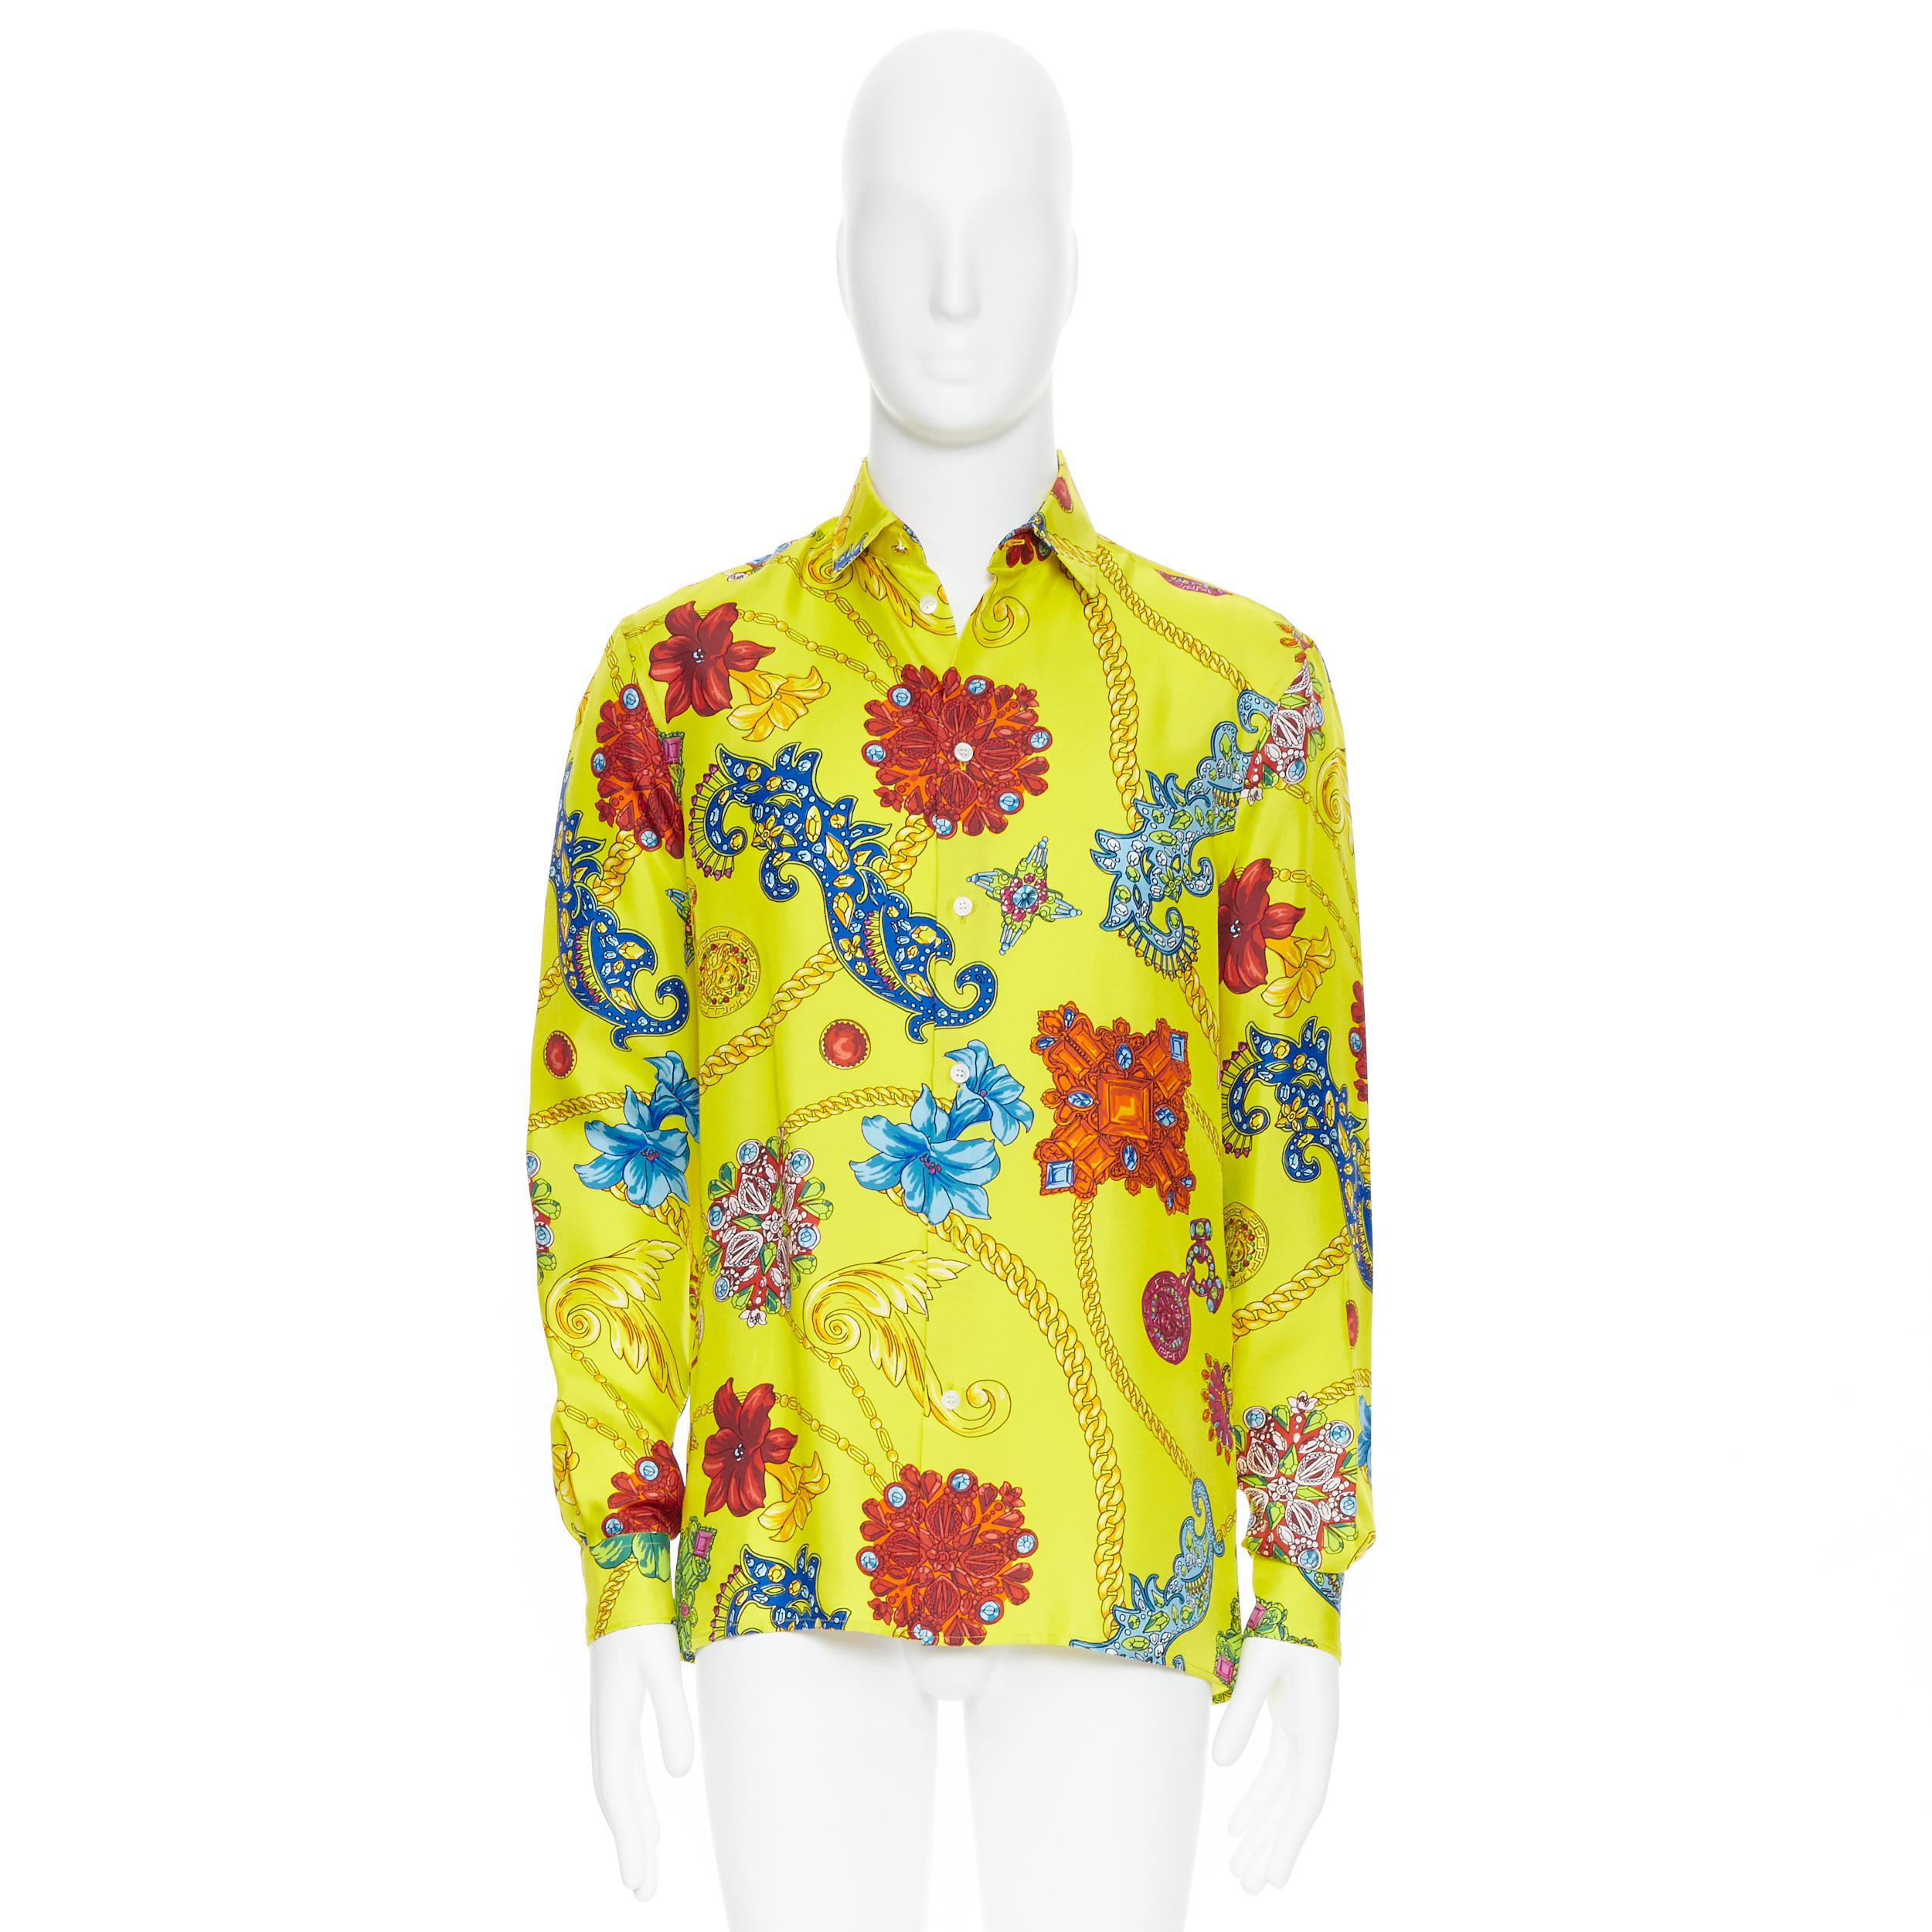 new VERSACE SS19 Runway yellow silk vintage jewel Medusa button shirt EU38  S
Designer: Donatella Versace
Brand: Versace
Style: Silk shirt (In the Style Of)

Condition: New

Dimensions: 
Length: 29.73 in (75.5 cm)Marked Size: 38 (EU)
Bust: 20.87 in